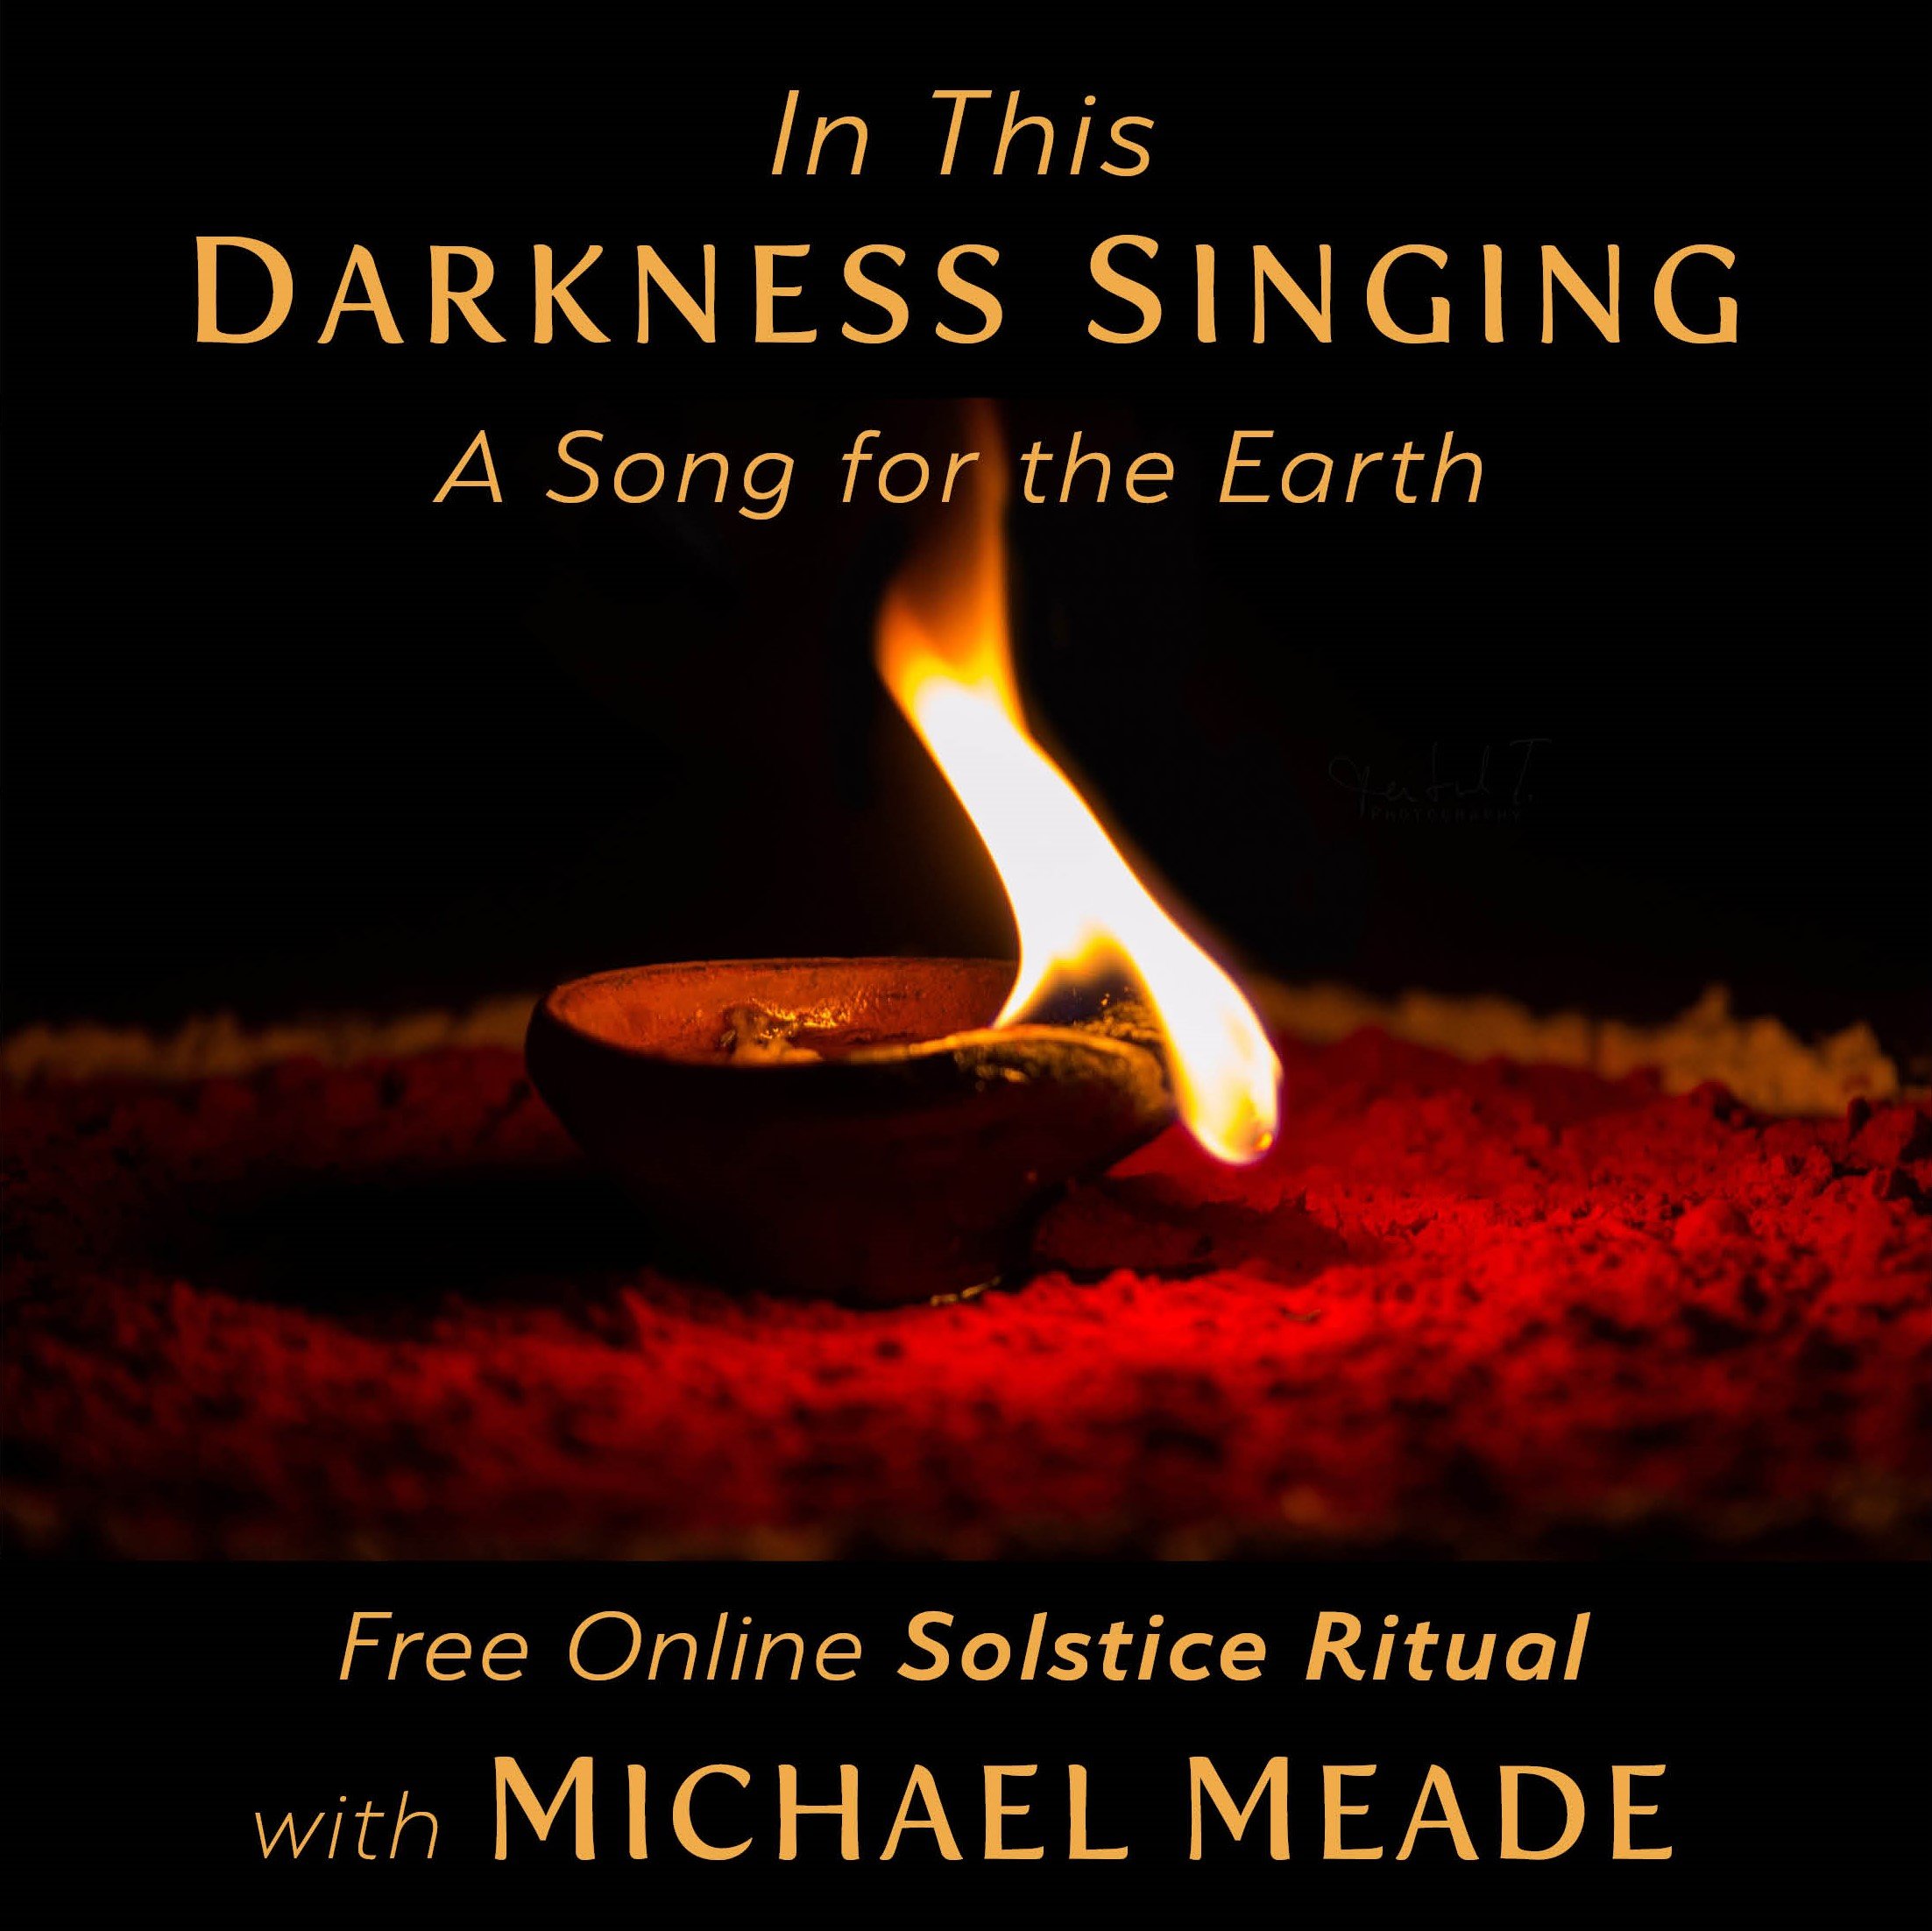 Likken winter Wizard In This Darkness Singing - Free Online Solstice Ritual — MICHAEL MEADE  MOSAIC VOICES